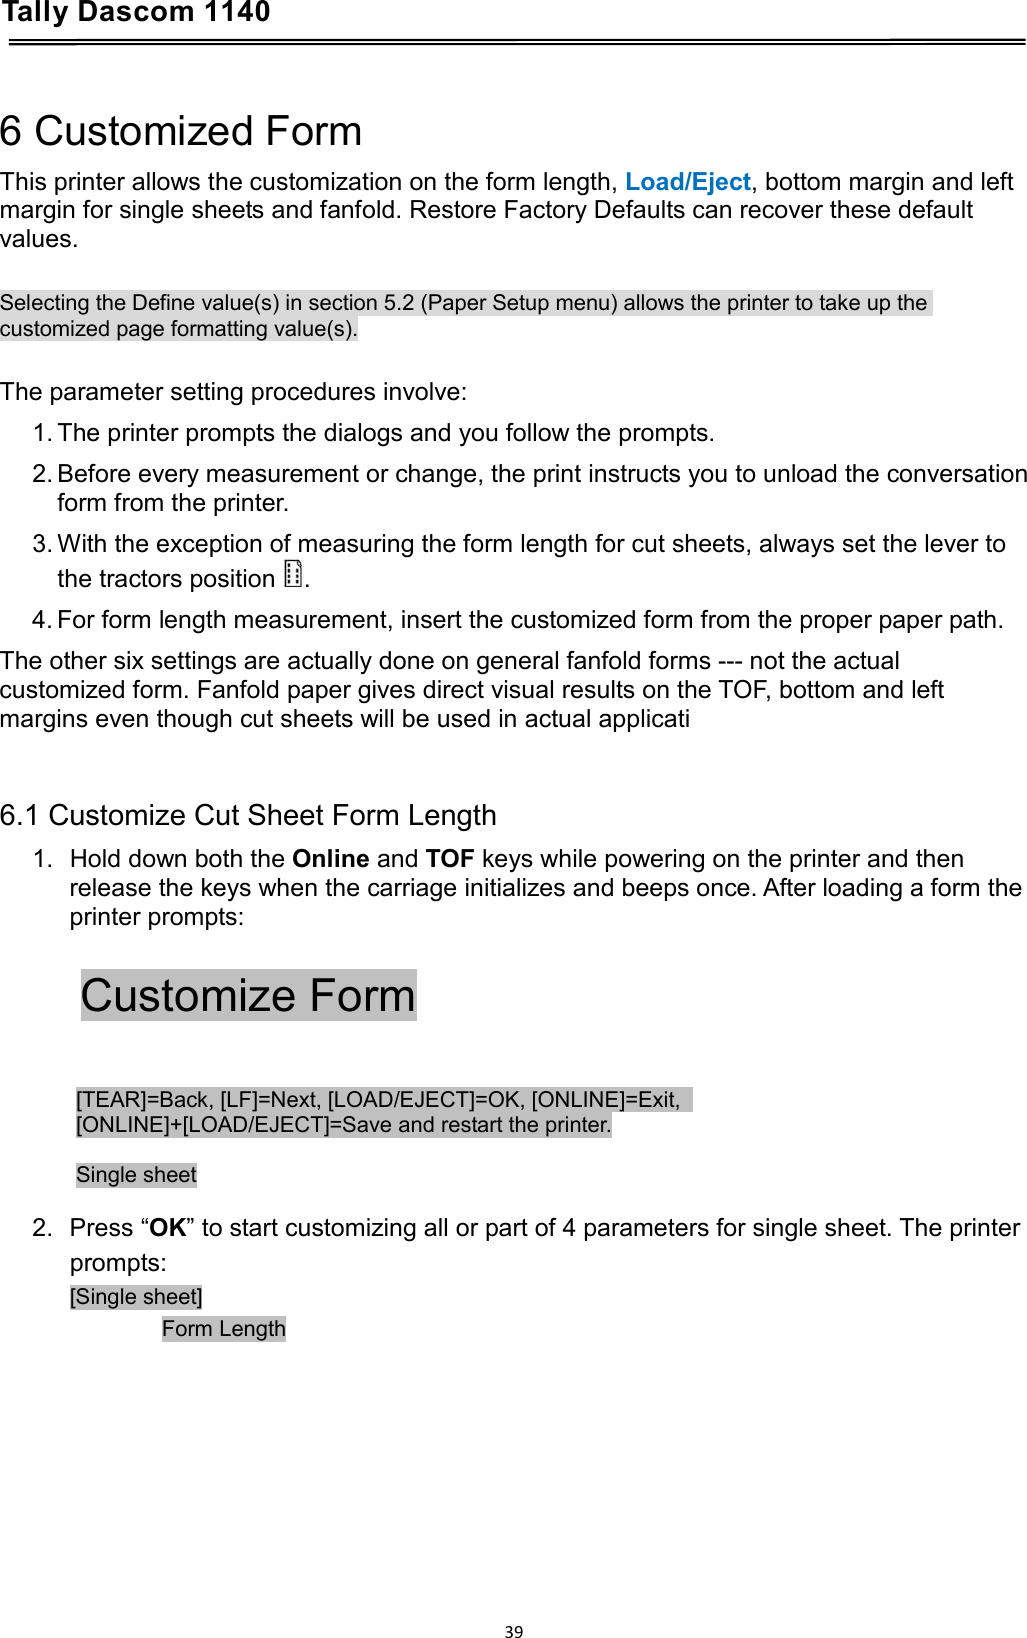 Tally Dascom 1140    6 Customized Form This printer allows the customization on the form length, Load/Eject, bottom margin and left margin for single sheets and fanfold. Restore Factory Defaults can recover these default values.  Selecting the Define value(s) in section 5.2 (Paper Setup menu) allows the printer to take up the customized page formatting value(s).  The parameter setting procedures involve: 1. The printer prompts the dialogs and you follow the prompts. 2. Before every measurement or change, the print instructs you to unload the conversation form from the printer.  3. With the exception of measuring the form length for cut sheets, always set the lever to the tractors position .  4. For form length measurement, insert the customized form from the proper paper path. The other six settings are actually done on general fanfold forms --- not the actual customized form. Fanfold paper gives direct visual results on the TOF, bottom and left margins even though cut sheets will be used in actual applicati   6.1 Customize Cut Sheet Form Length 1. Hold down both the Online and TOF keys while powering on the printer and then release the keys when the carriage initializes and beeps once. After loading a form the printer prompts:  Customize Form  [TEAR]=Back, [LF]=Next, [LOAD/EJECT]=OK, [ONLINE]=Exit,   [ONLINE]+[LOAD/EJECT]=Save and restart the printer.  Single sheet  2.  Press “OK” to start customizing all or part of 4 parameters for single sheet. The printer prompts: [Single sheet]          Form Length        39  